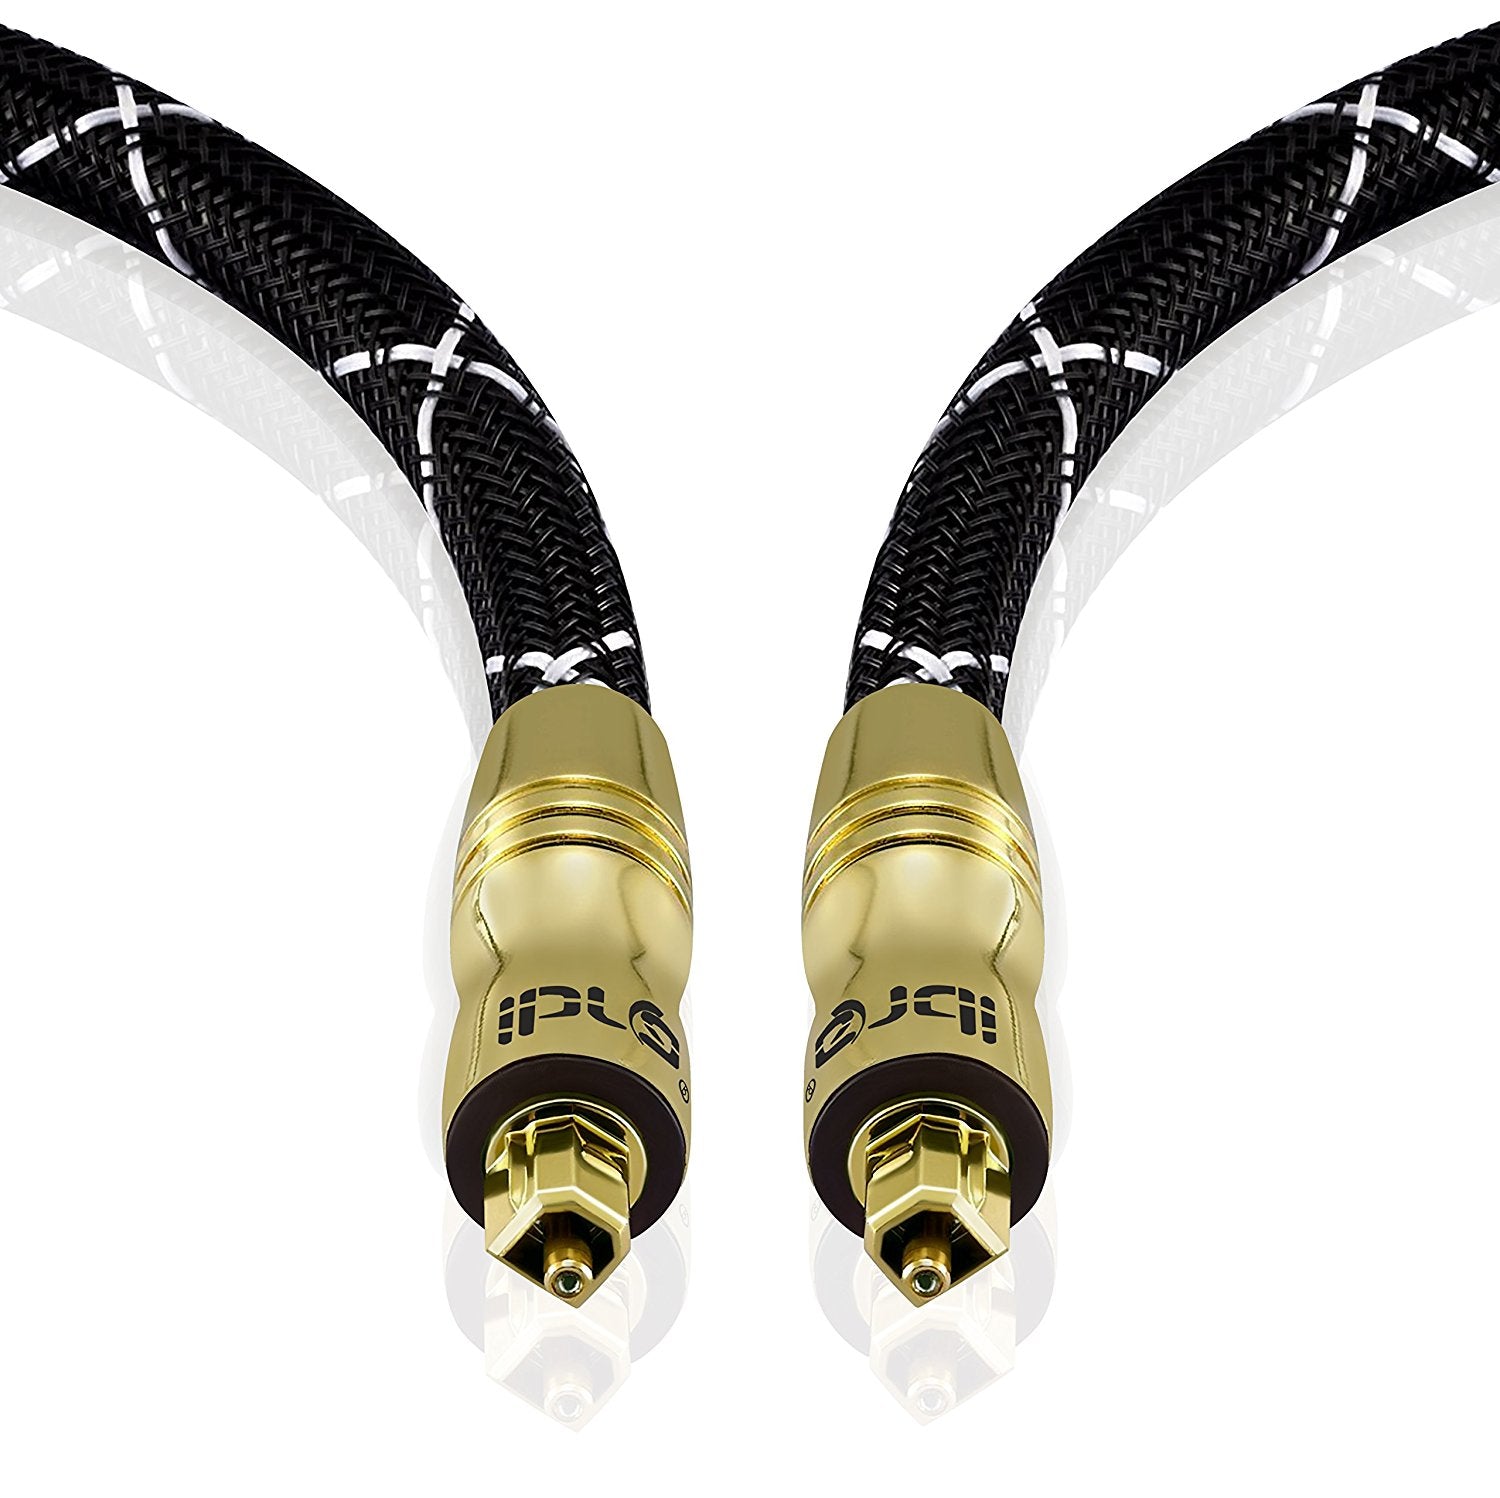 IBRA Black Master 4M - Optical TOSLINK Digital Audio Cable - Fiber Optic Cable - 24K Gold Casing - Compatible with PS3,Sky HD, HDtvs, Blu-rays, AV Amps